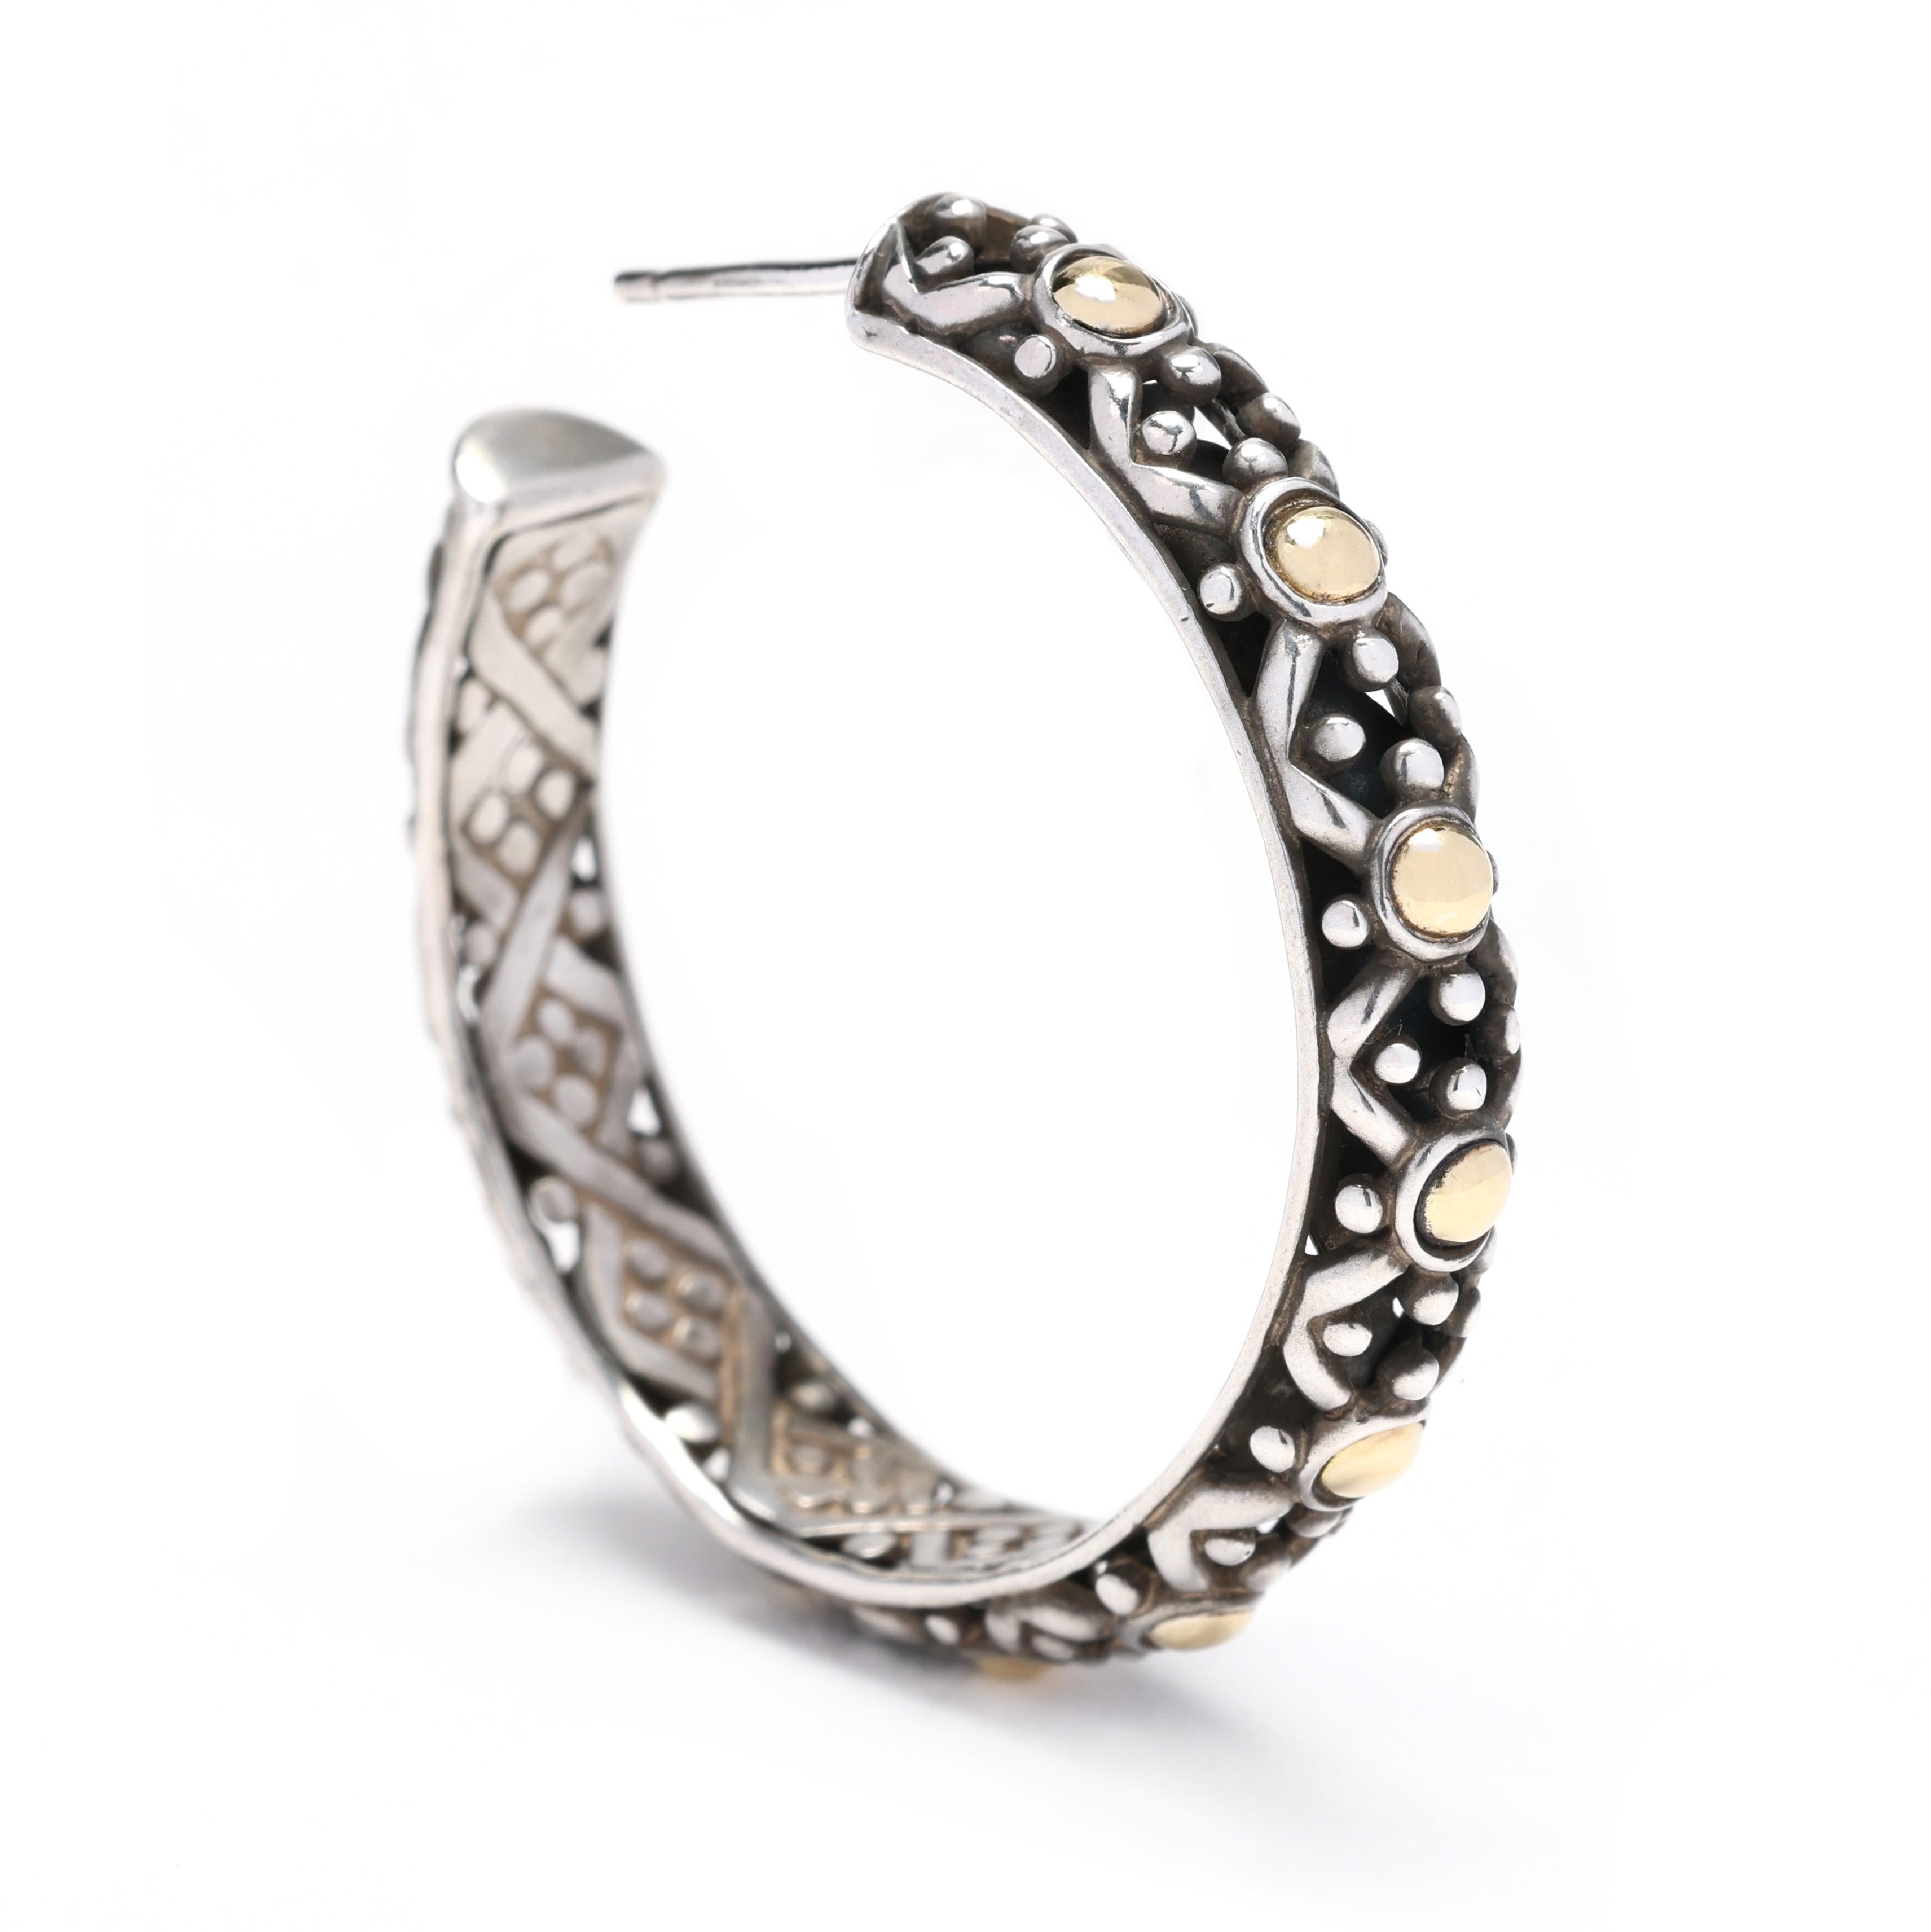 These John Hardy large dot hoops are a striking pair of earrings that will add a touch of sophistication to any outfit. Made from 18k yellow gold and sterling silver, these hoop earrings feature an intricate dot pattern that gives them a unique and